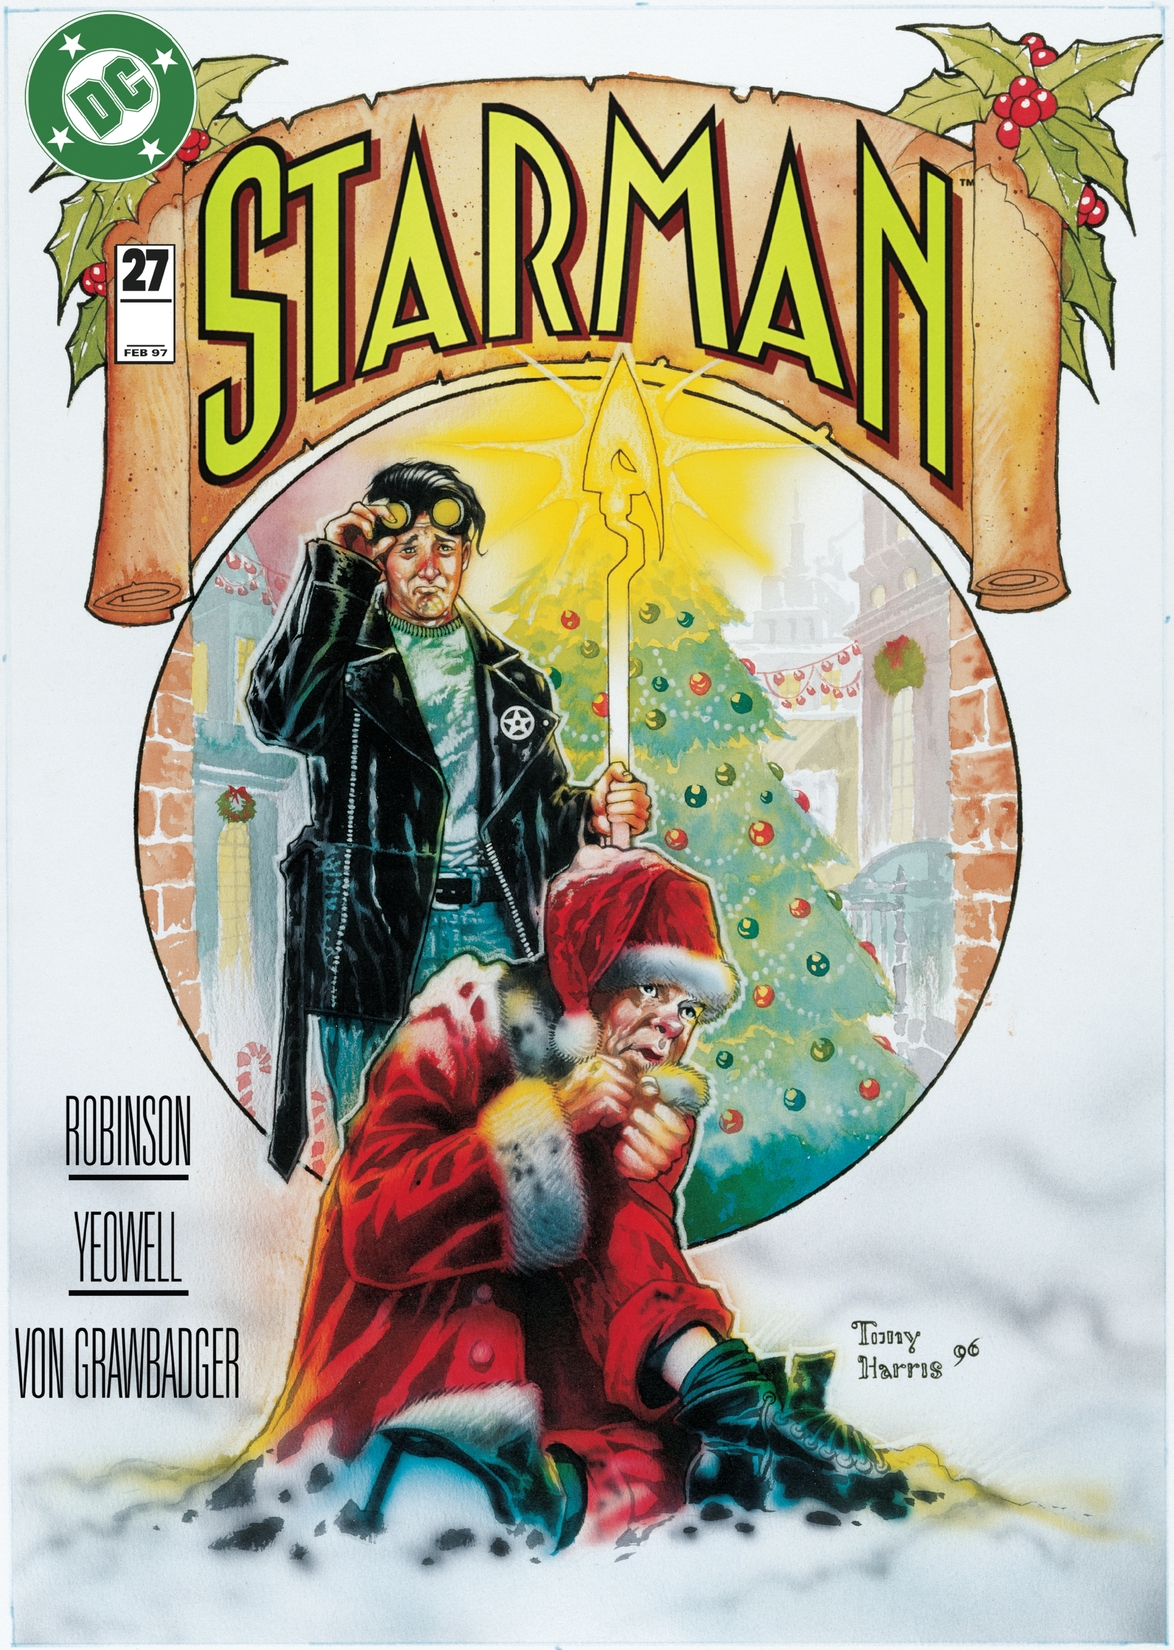 Starman (1994-) #27 preview images